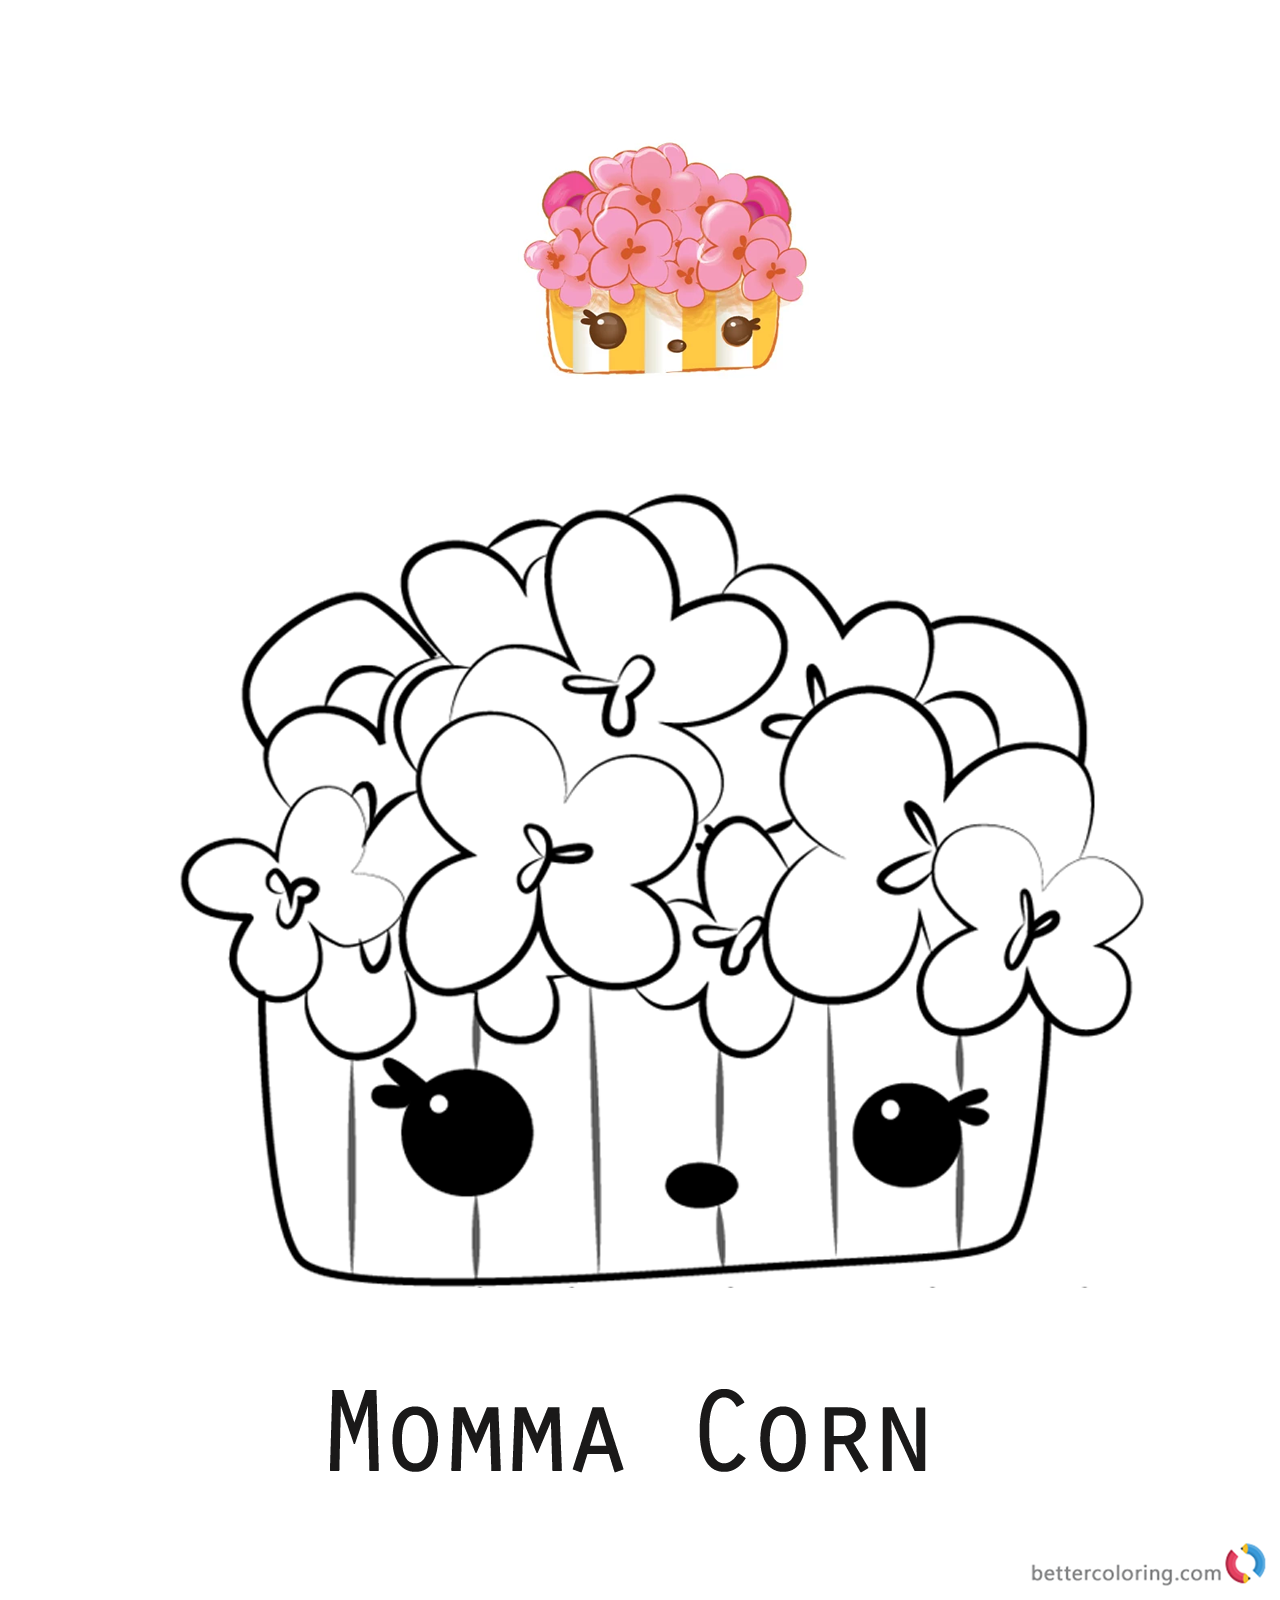 Momma Corn Num Noms Coloring Pages Series 2 Free Printable Coloring Pages